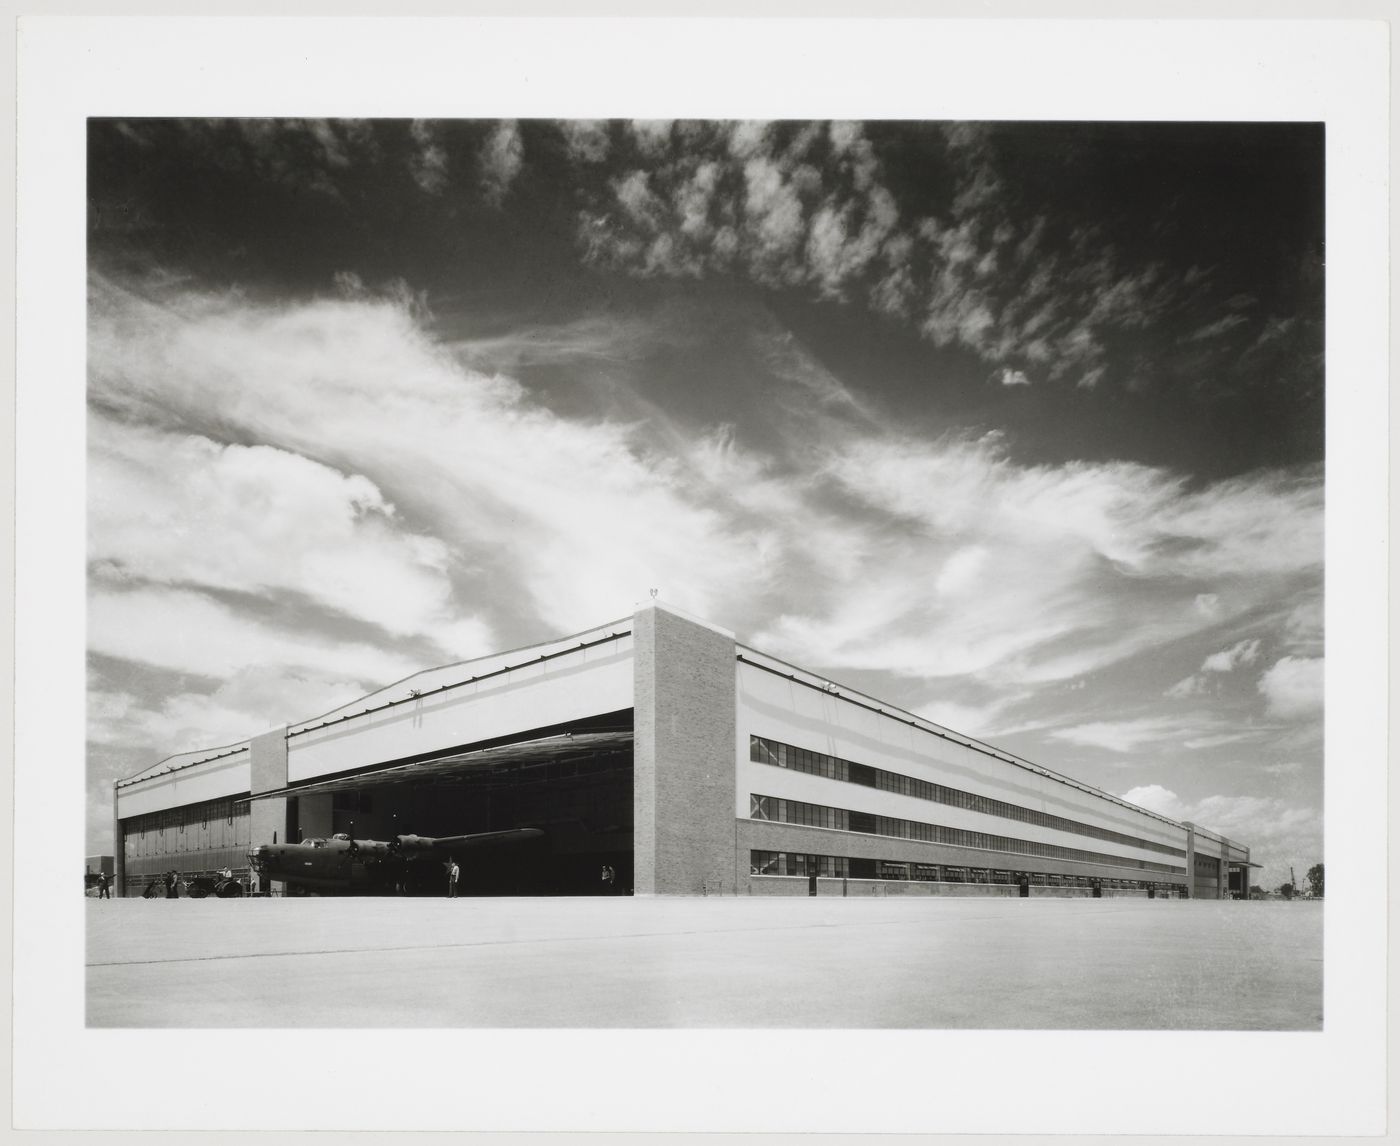 View of the principal and lateral façades of a Hangar, Ford Motor Company Willow Run Bomber Assembly Plant, Willow Run, Michigan